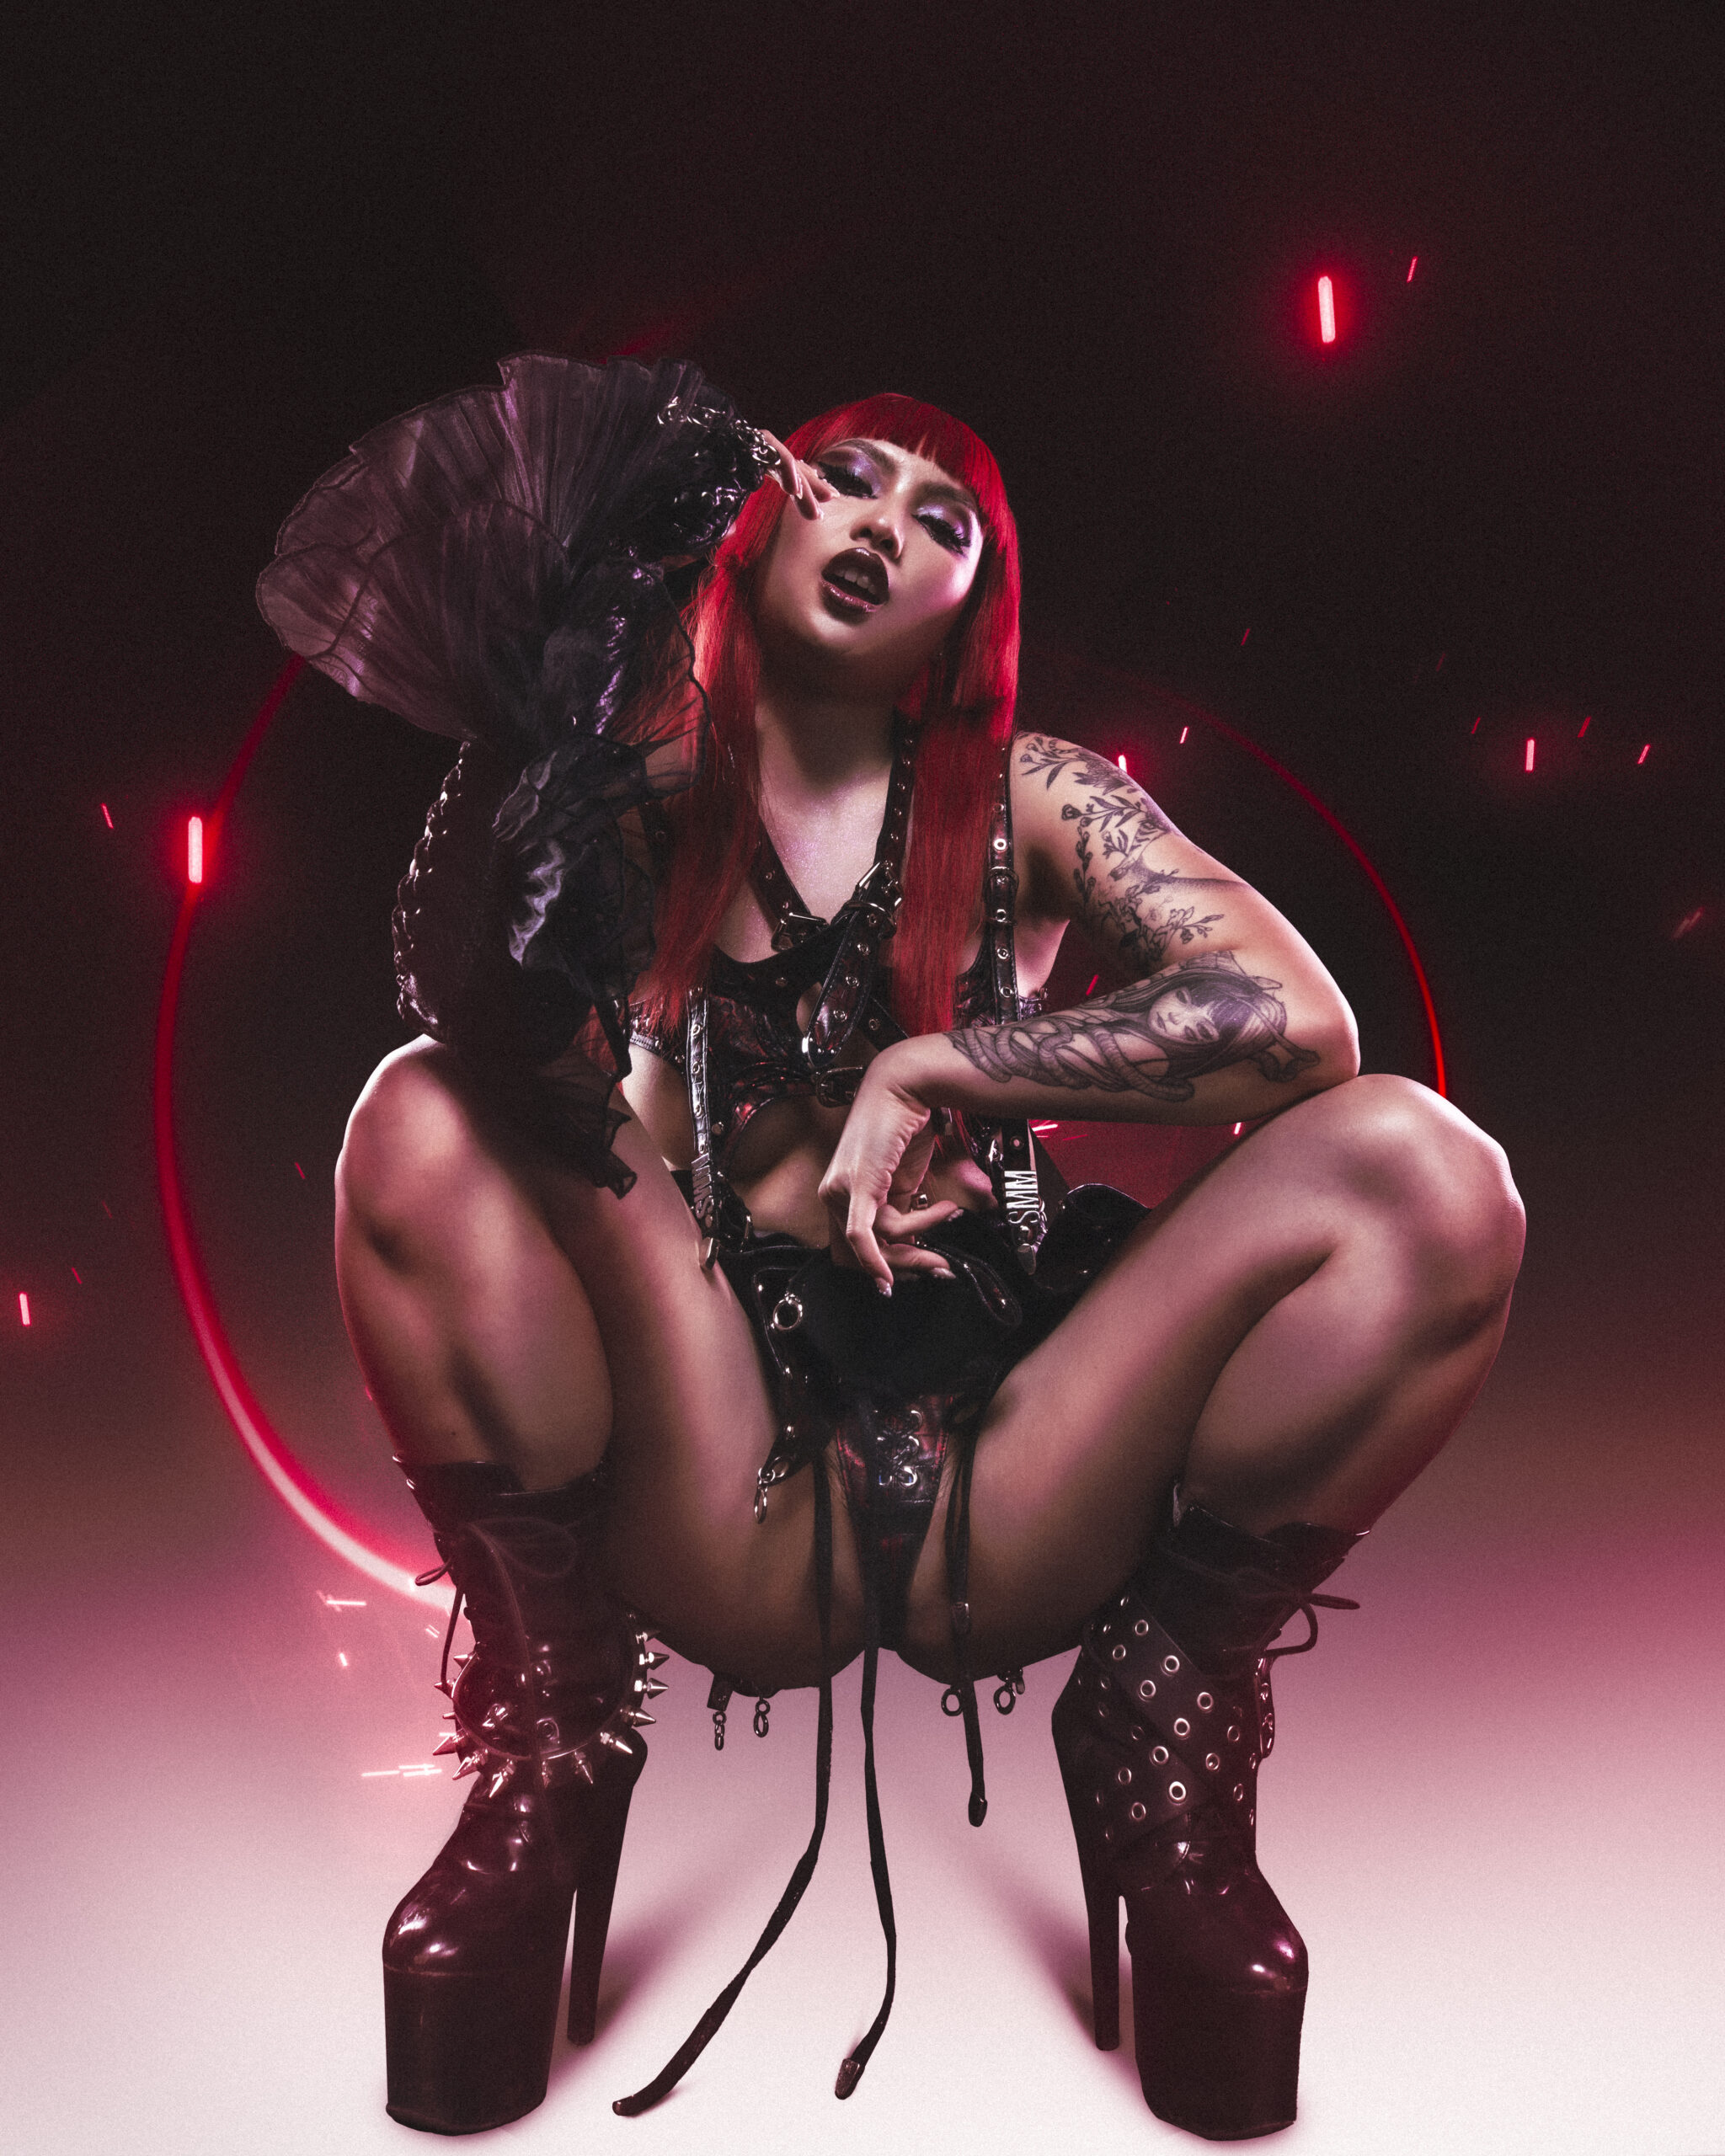 EXPLORE THE CAPTIVATING WORLD OF TOMIE, NYC’S HOTTEST FEMME DOMME